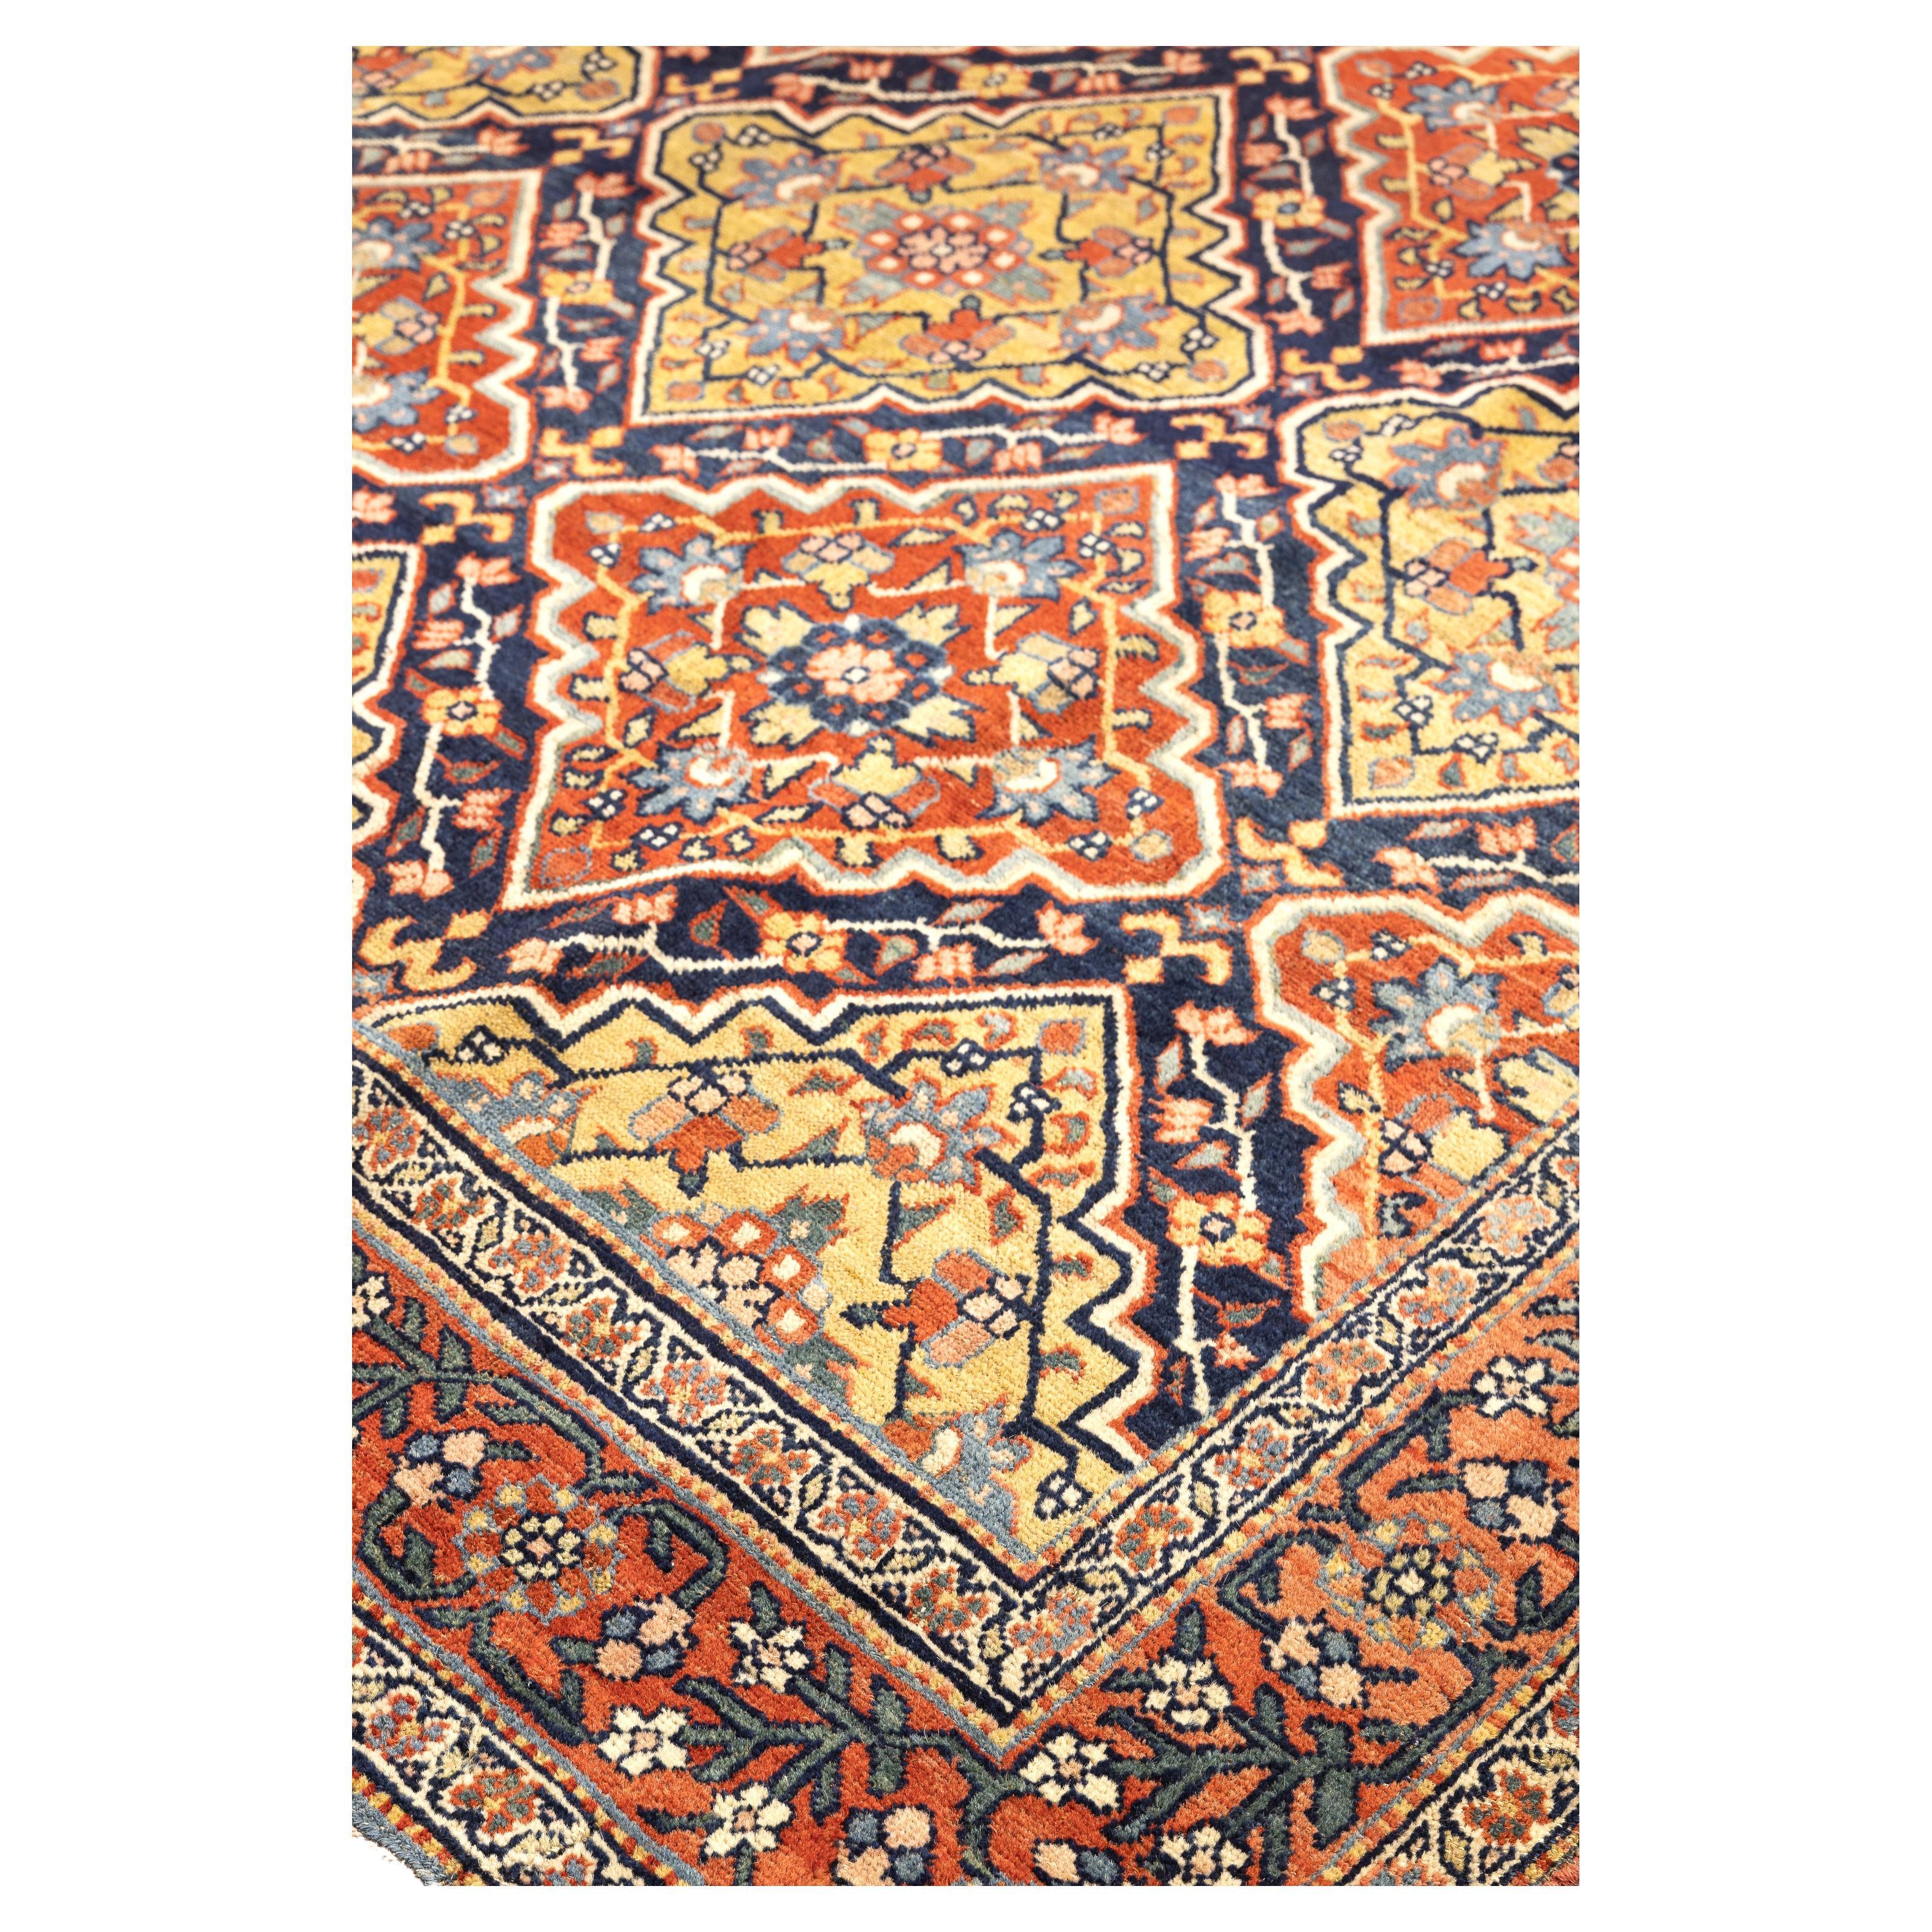 Bidjar – Northwest Persia

This magnificent Bidjar gallery is impressive for its large size and vibrant design, which a master artist made with skilled hands. The navy-blue field is covered with an all-over design with diamonds, spicy mustard